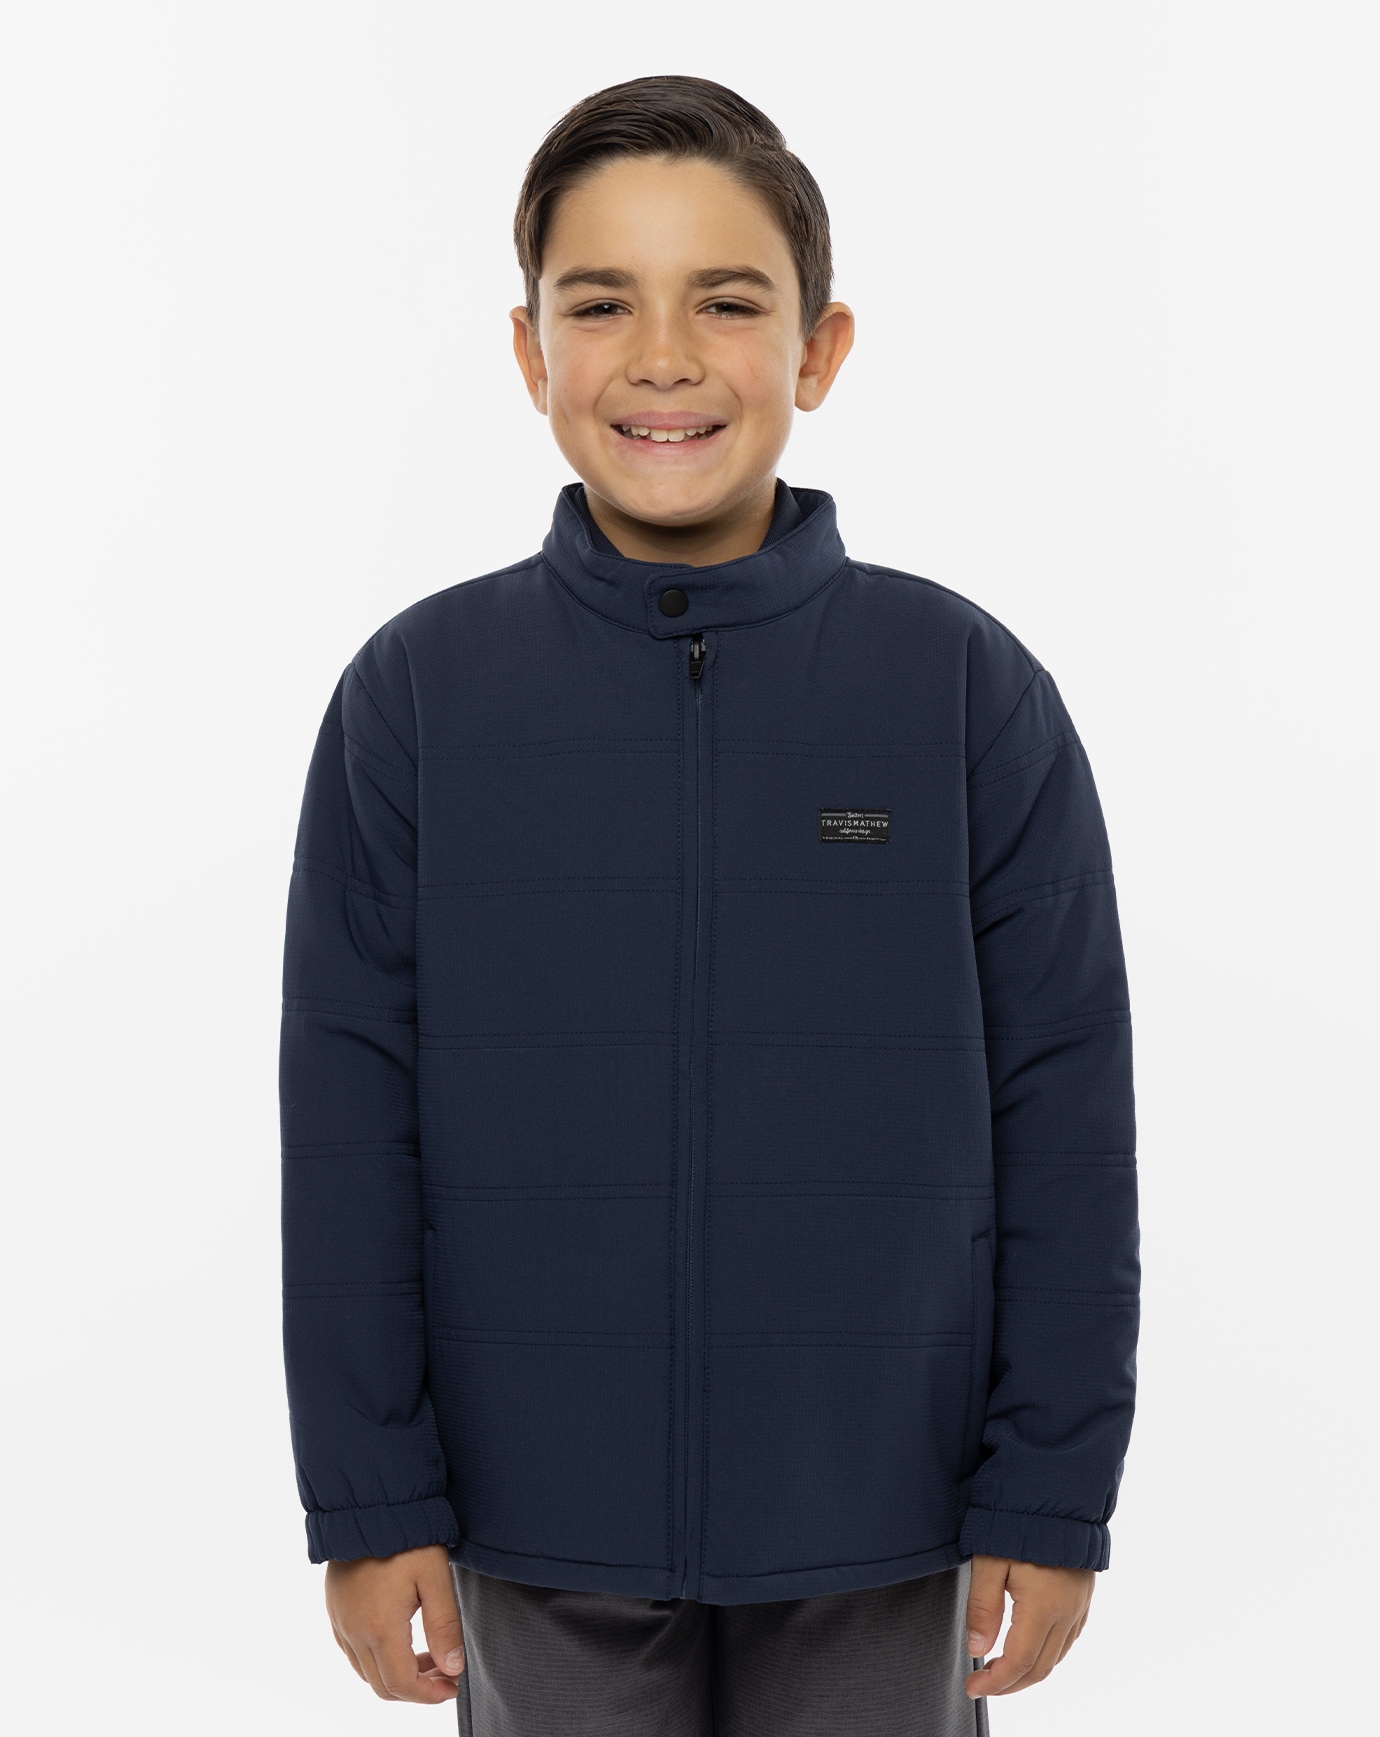 Related Product - INTERLUDE YOUTH PUFFER JACKET